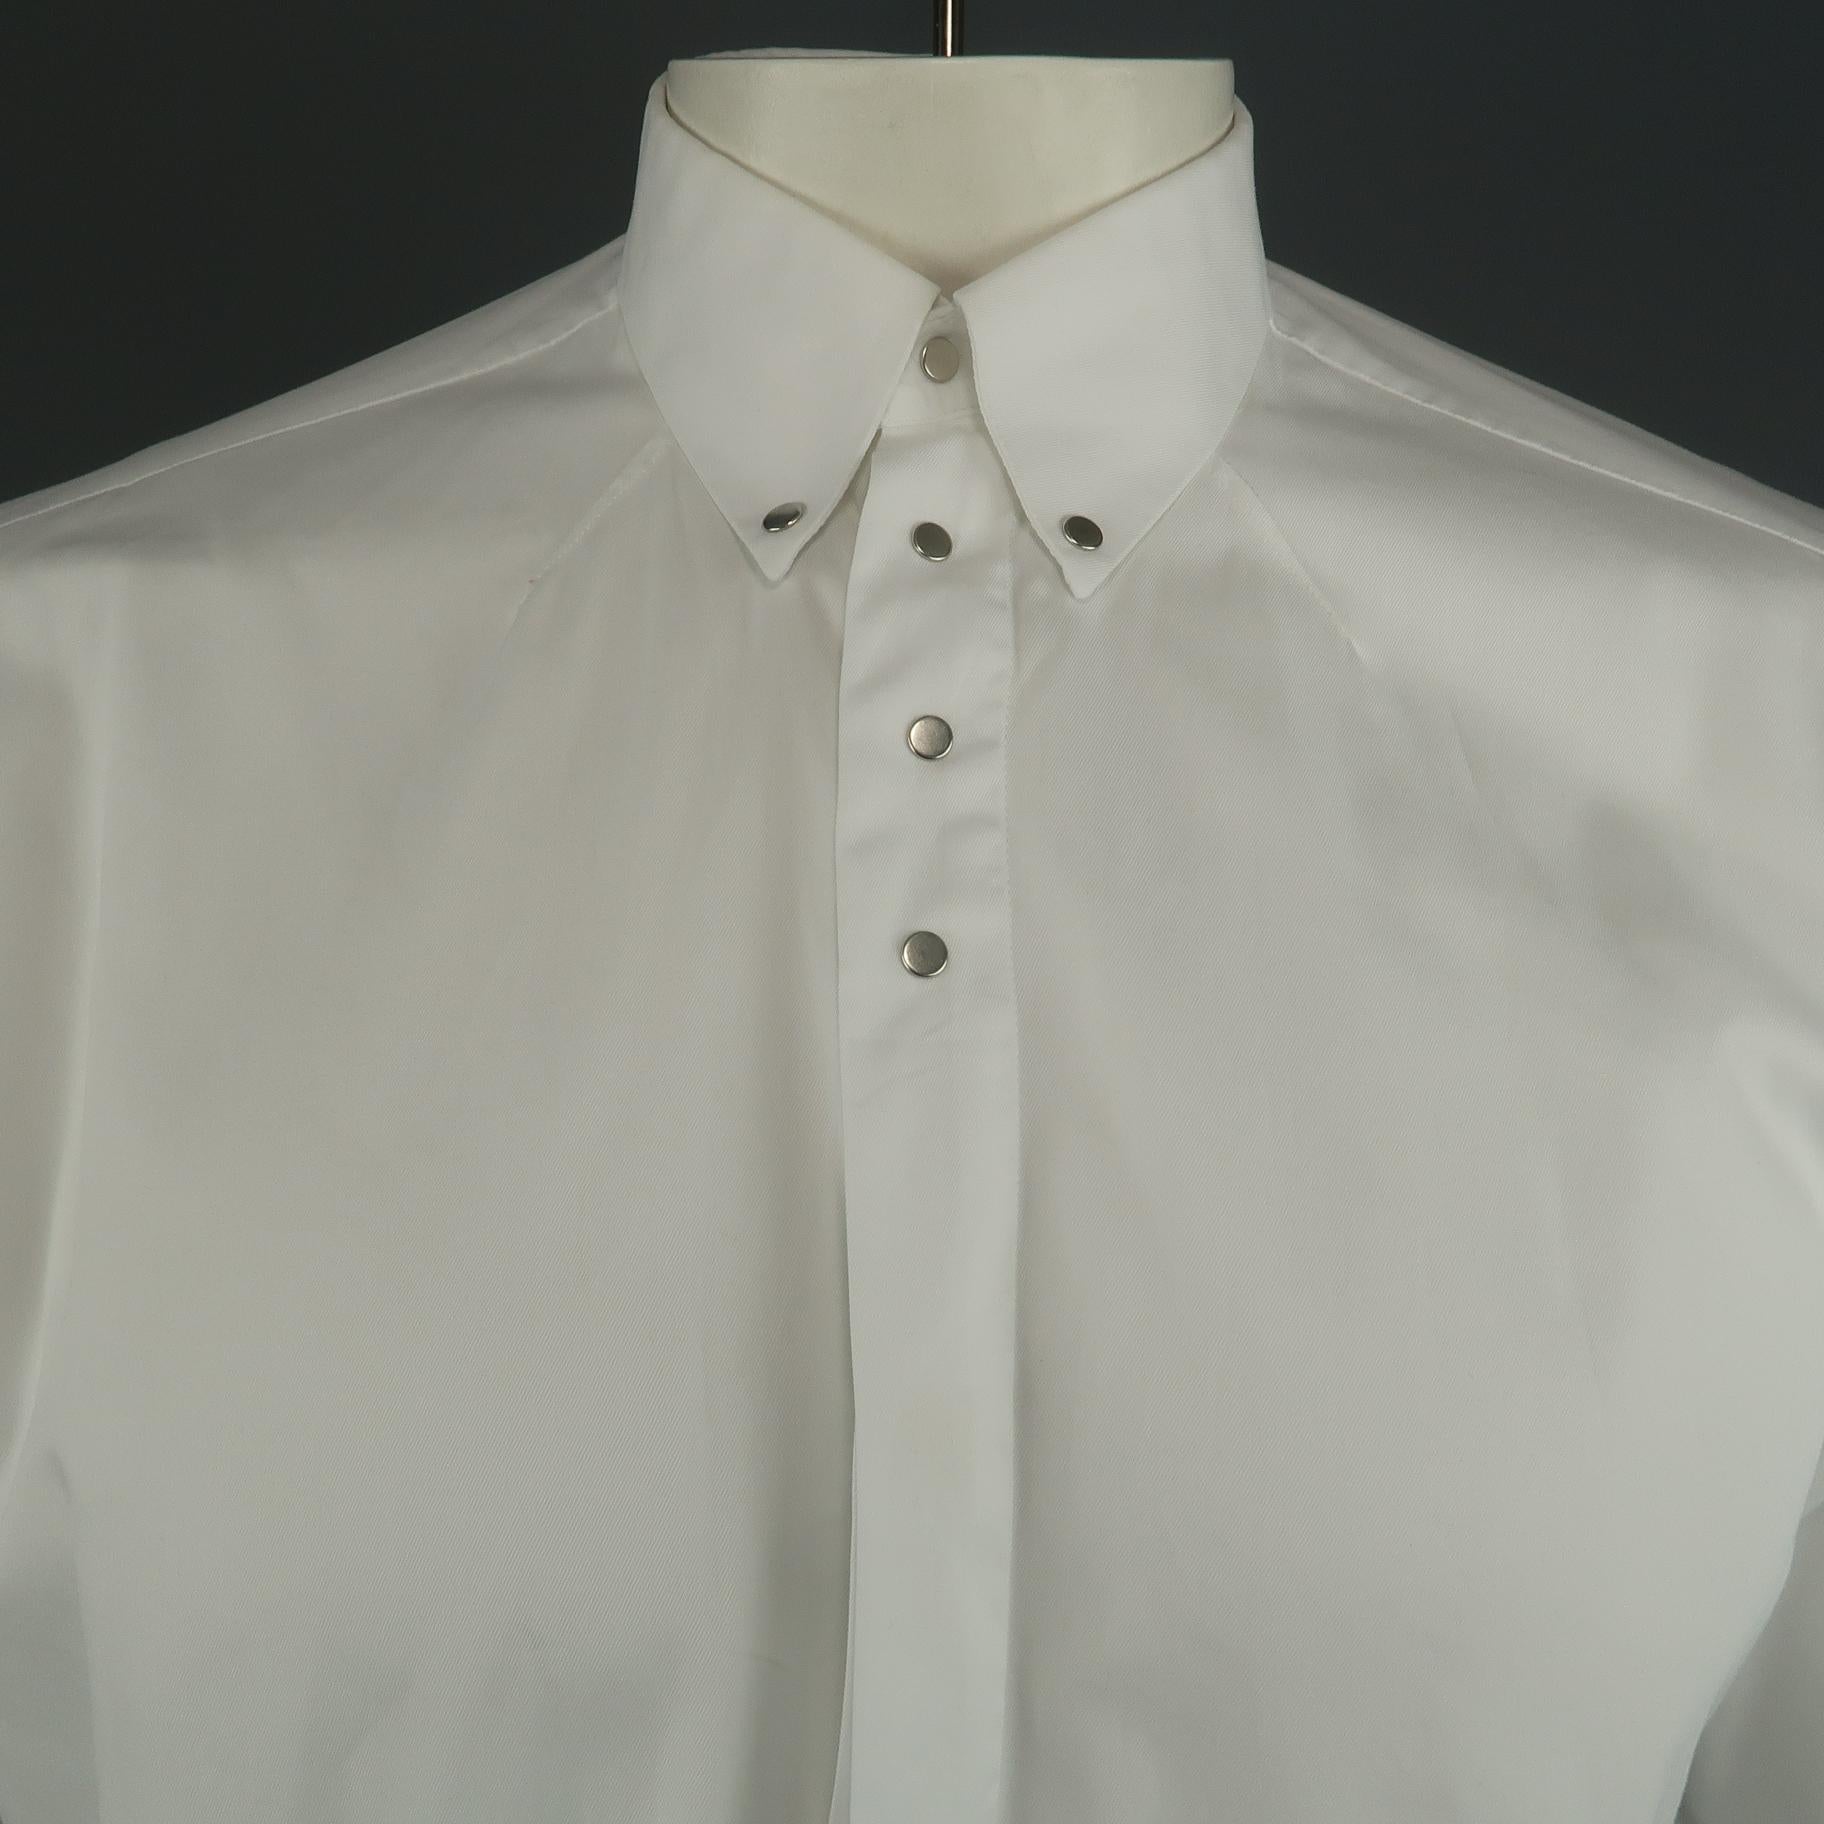 GIVENCHY long sleeve shirt comes in a white cotton featuring a button up style and silver snap details on the collar and upper closure.
 
Excellent Pre-Owned Condition.
Marked: 39
 
Measurements:
 
Shoulder: 17.5 in.
Chest: 48 in.
Sleeve: 25